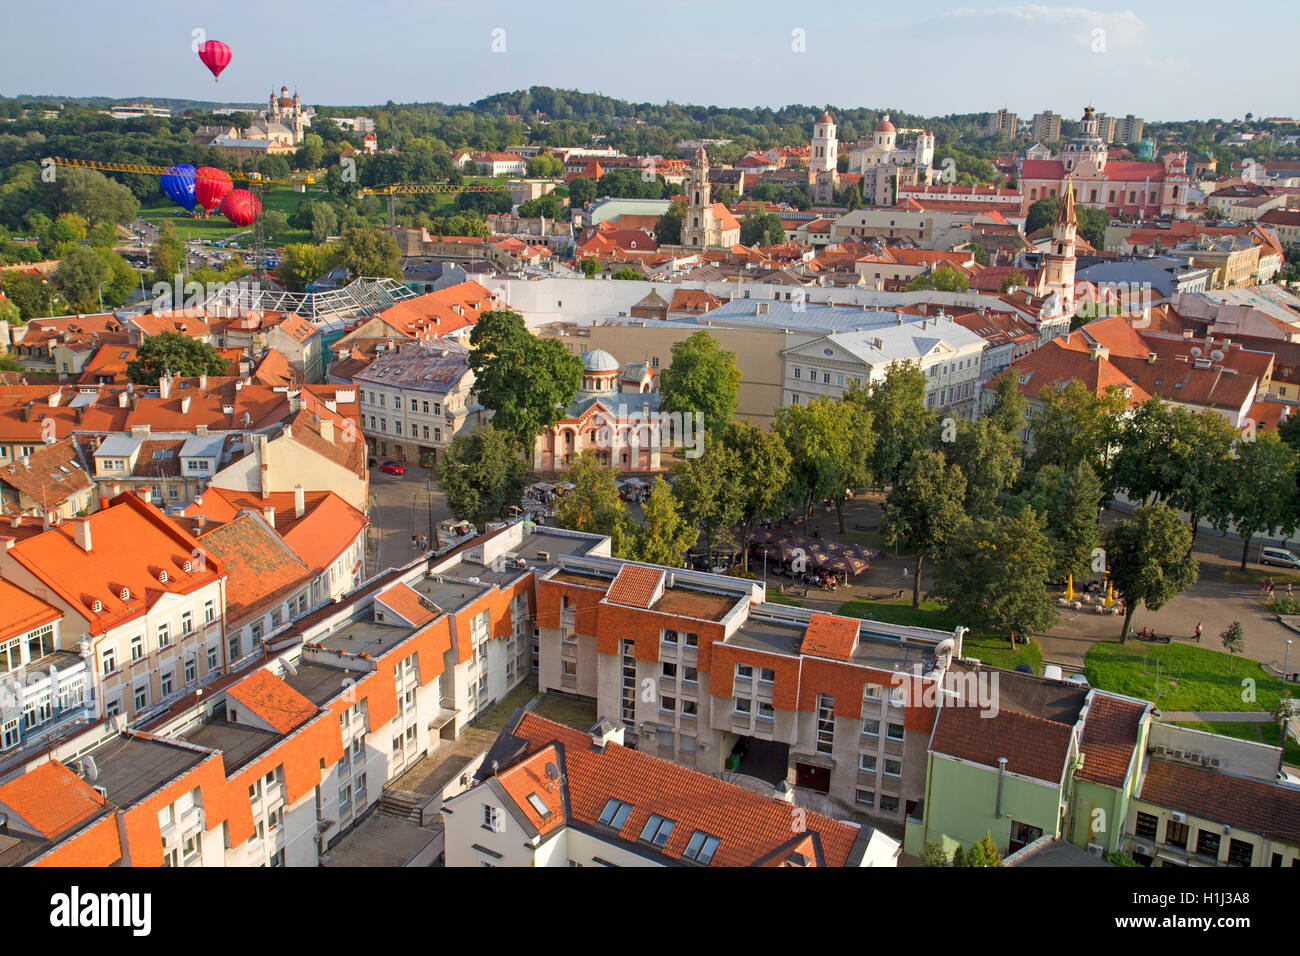 Hot air balloon flying over the old town of Vilnius Stock Photo